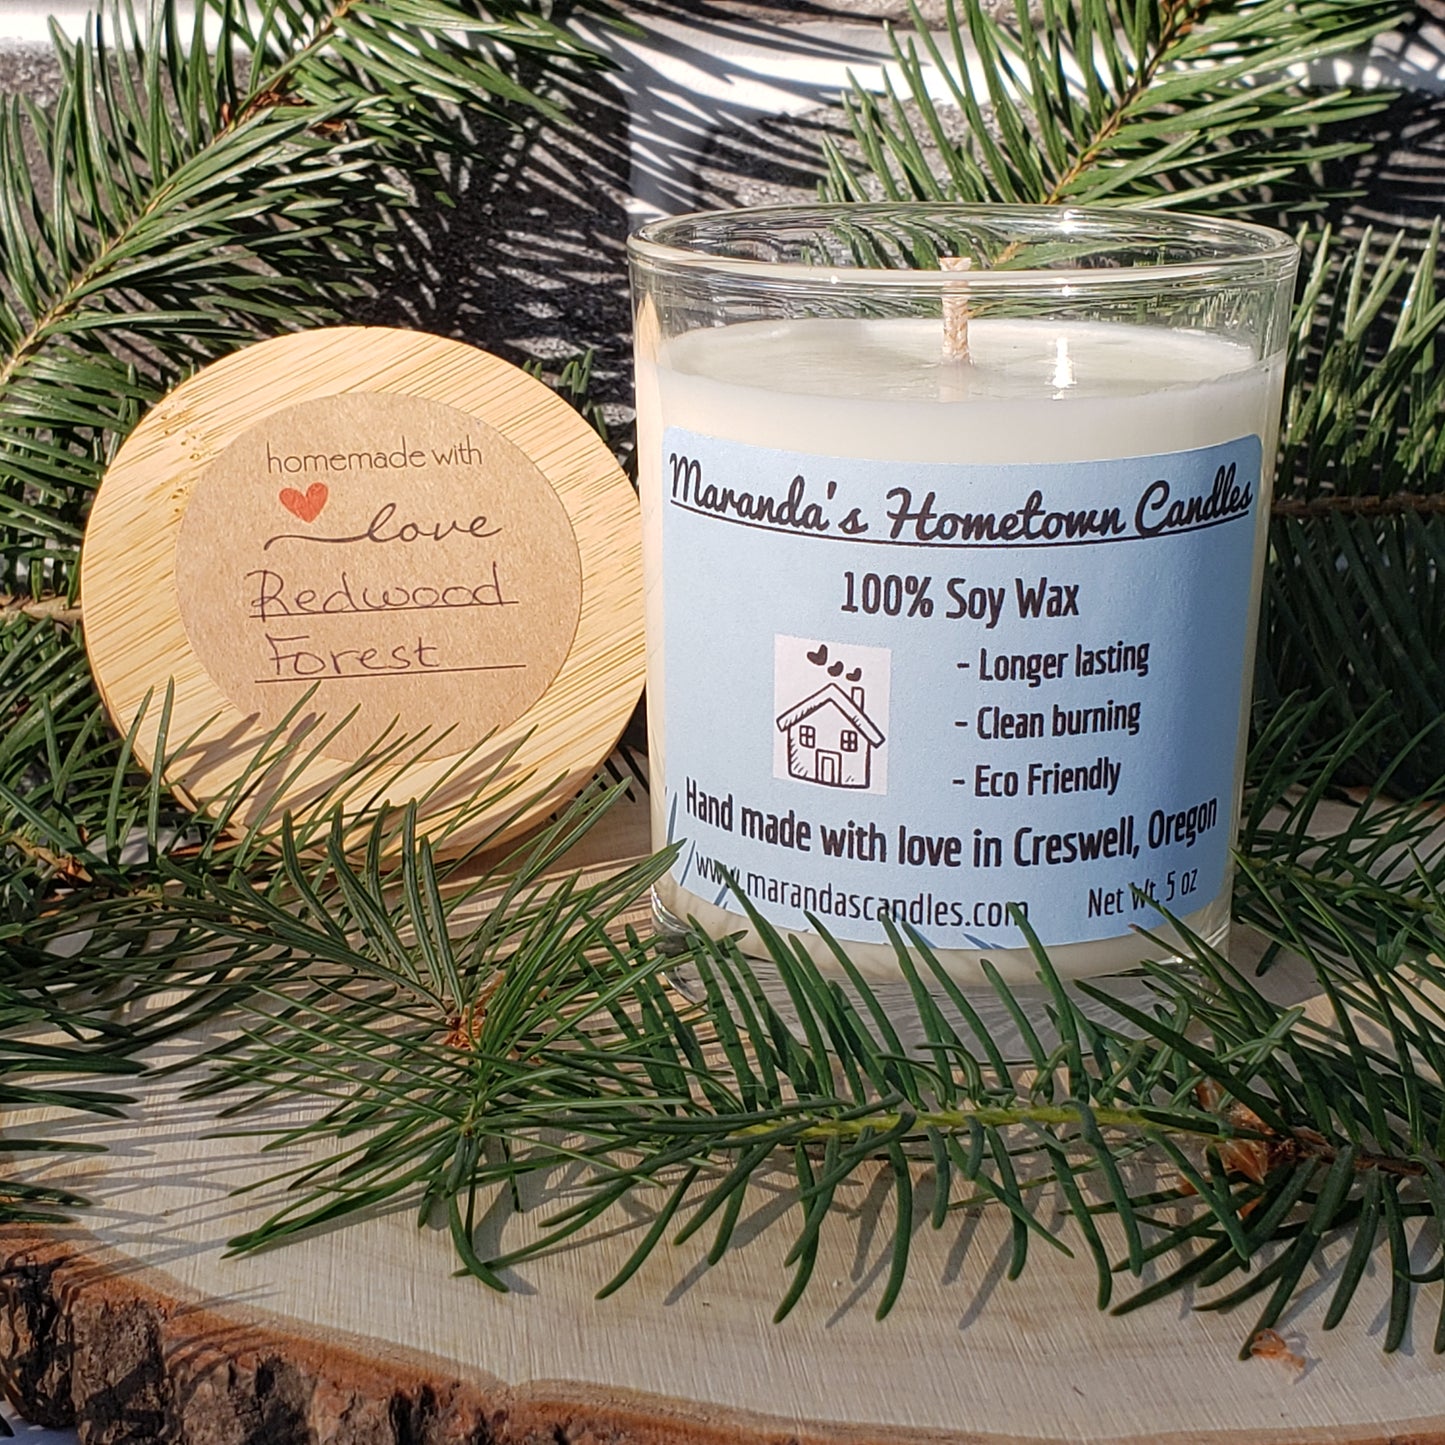 Redwood Forest Scented Candle 100% Natural Soy Wax